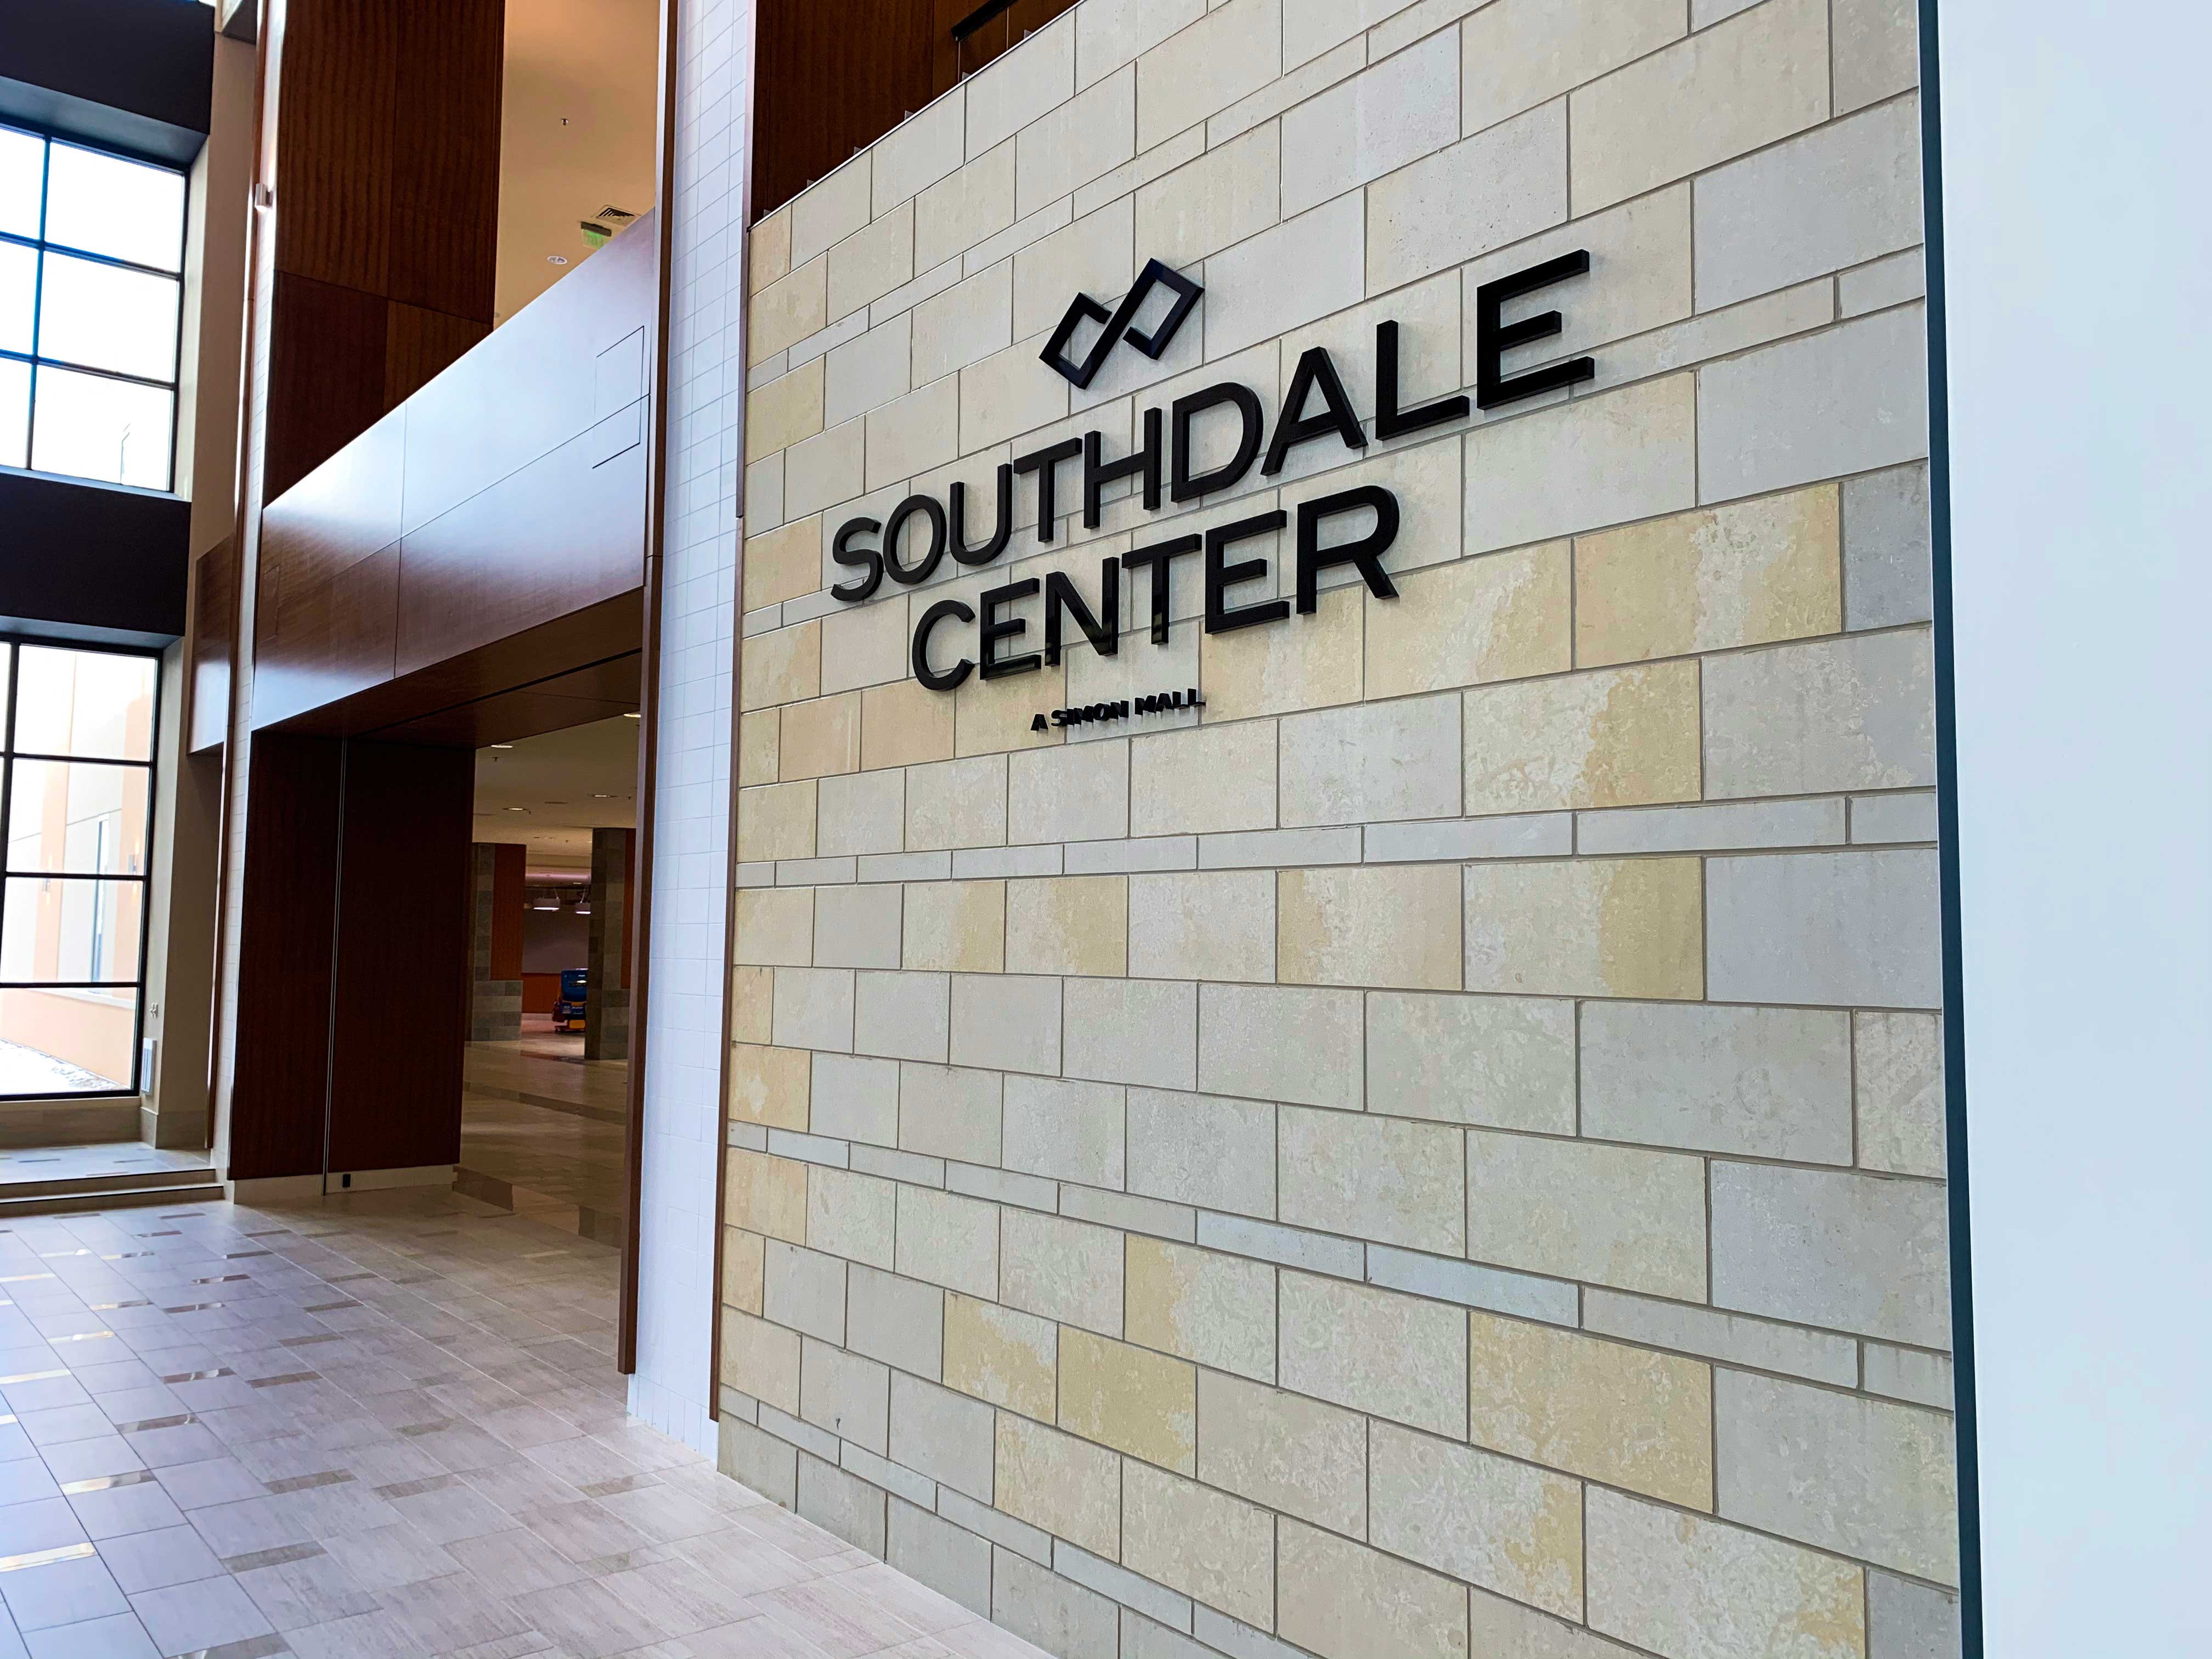 Southdale Center - Dimensional Letters sign - Impression Signs and Graphics